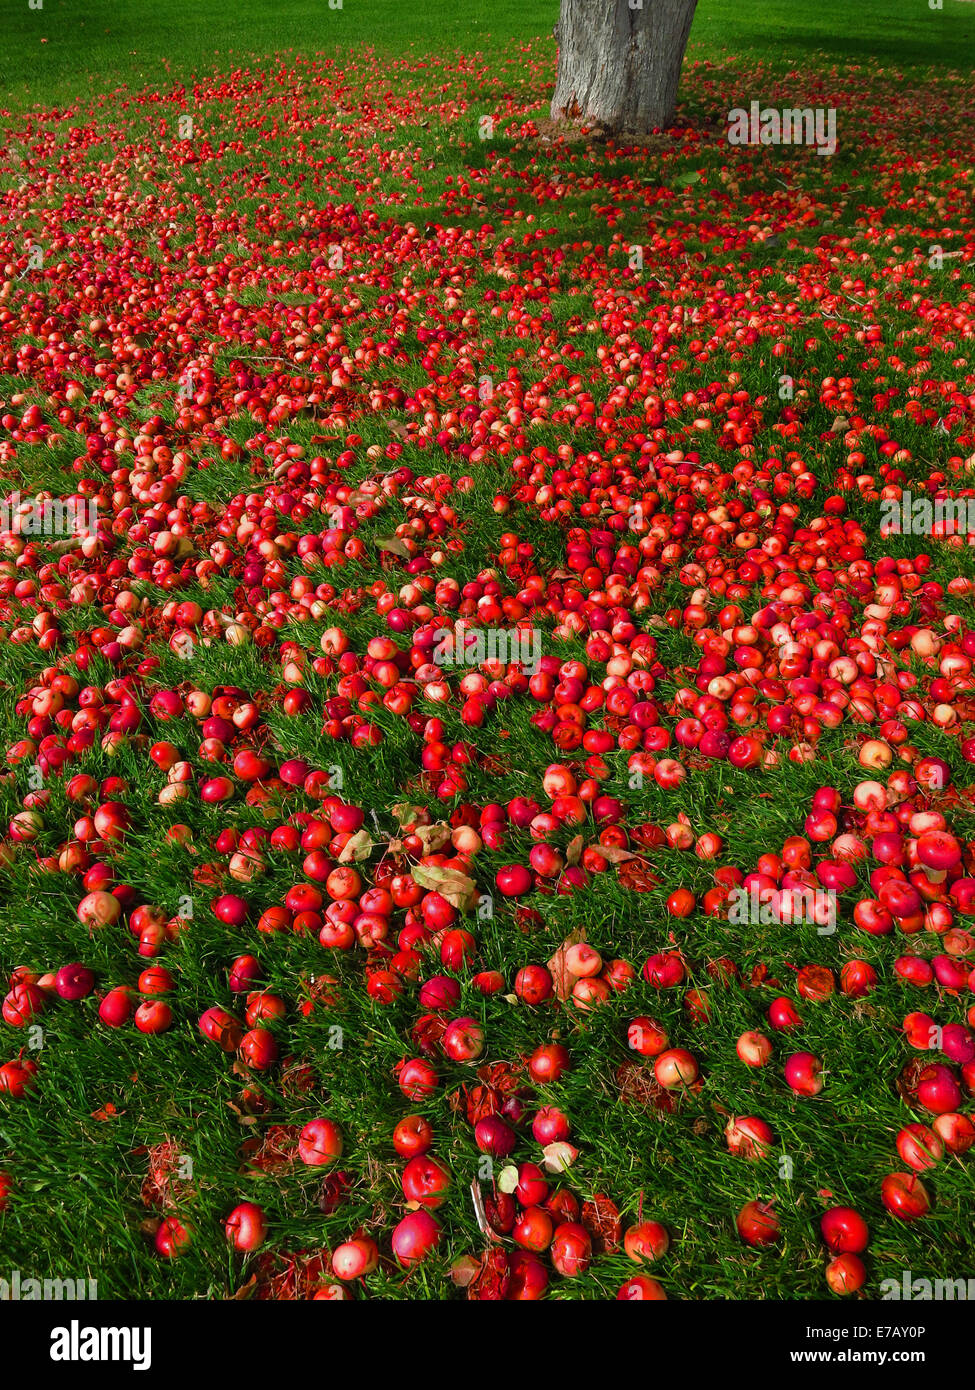 Apples on the ground with green grass and apple tree Stock Photo